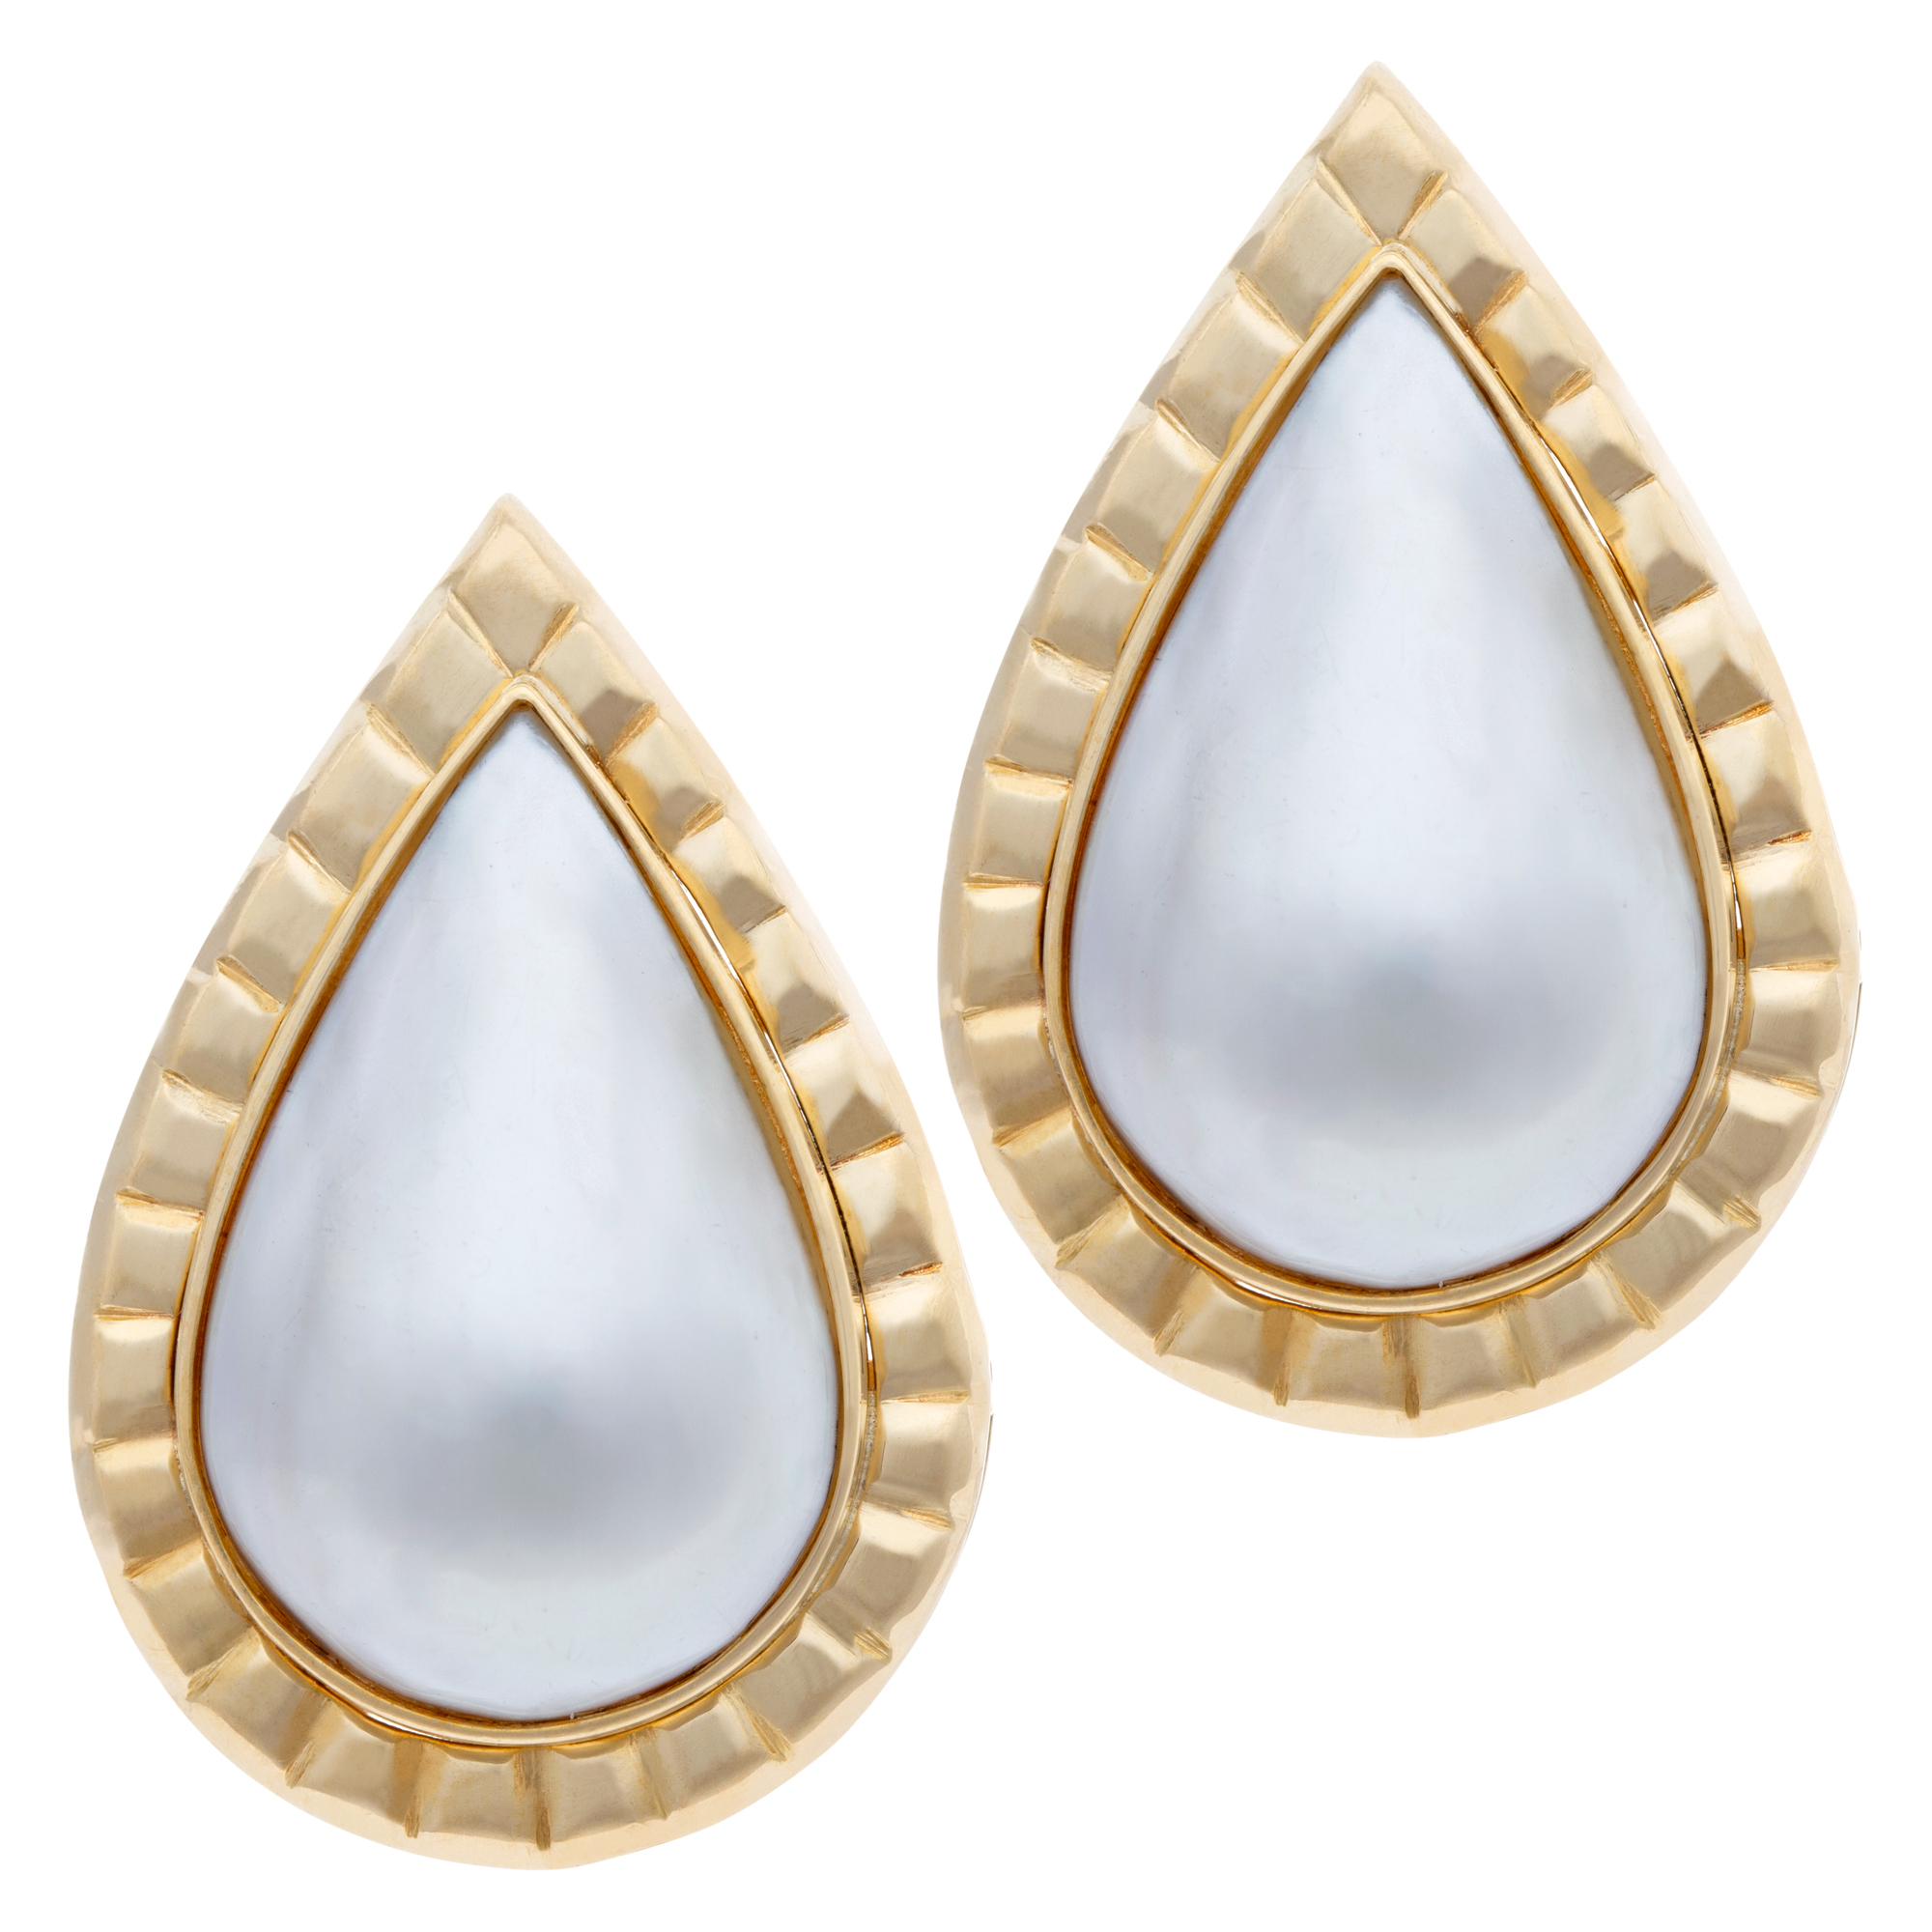 Mobe pear shape pearl earrings framed in ribbed 18k gold with omega bac